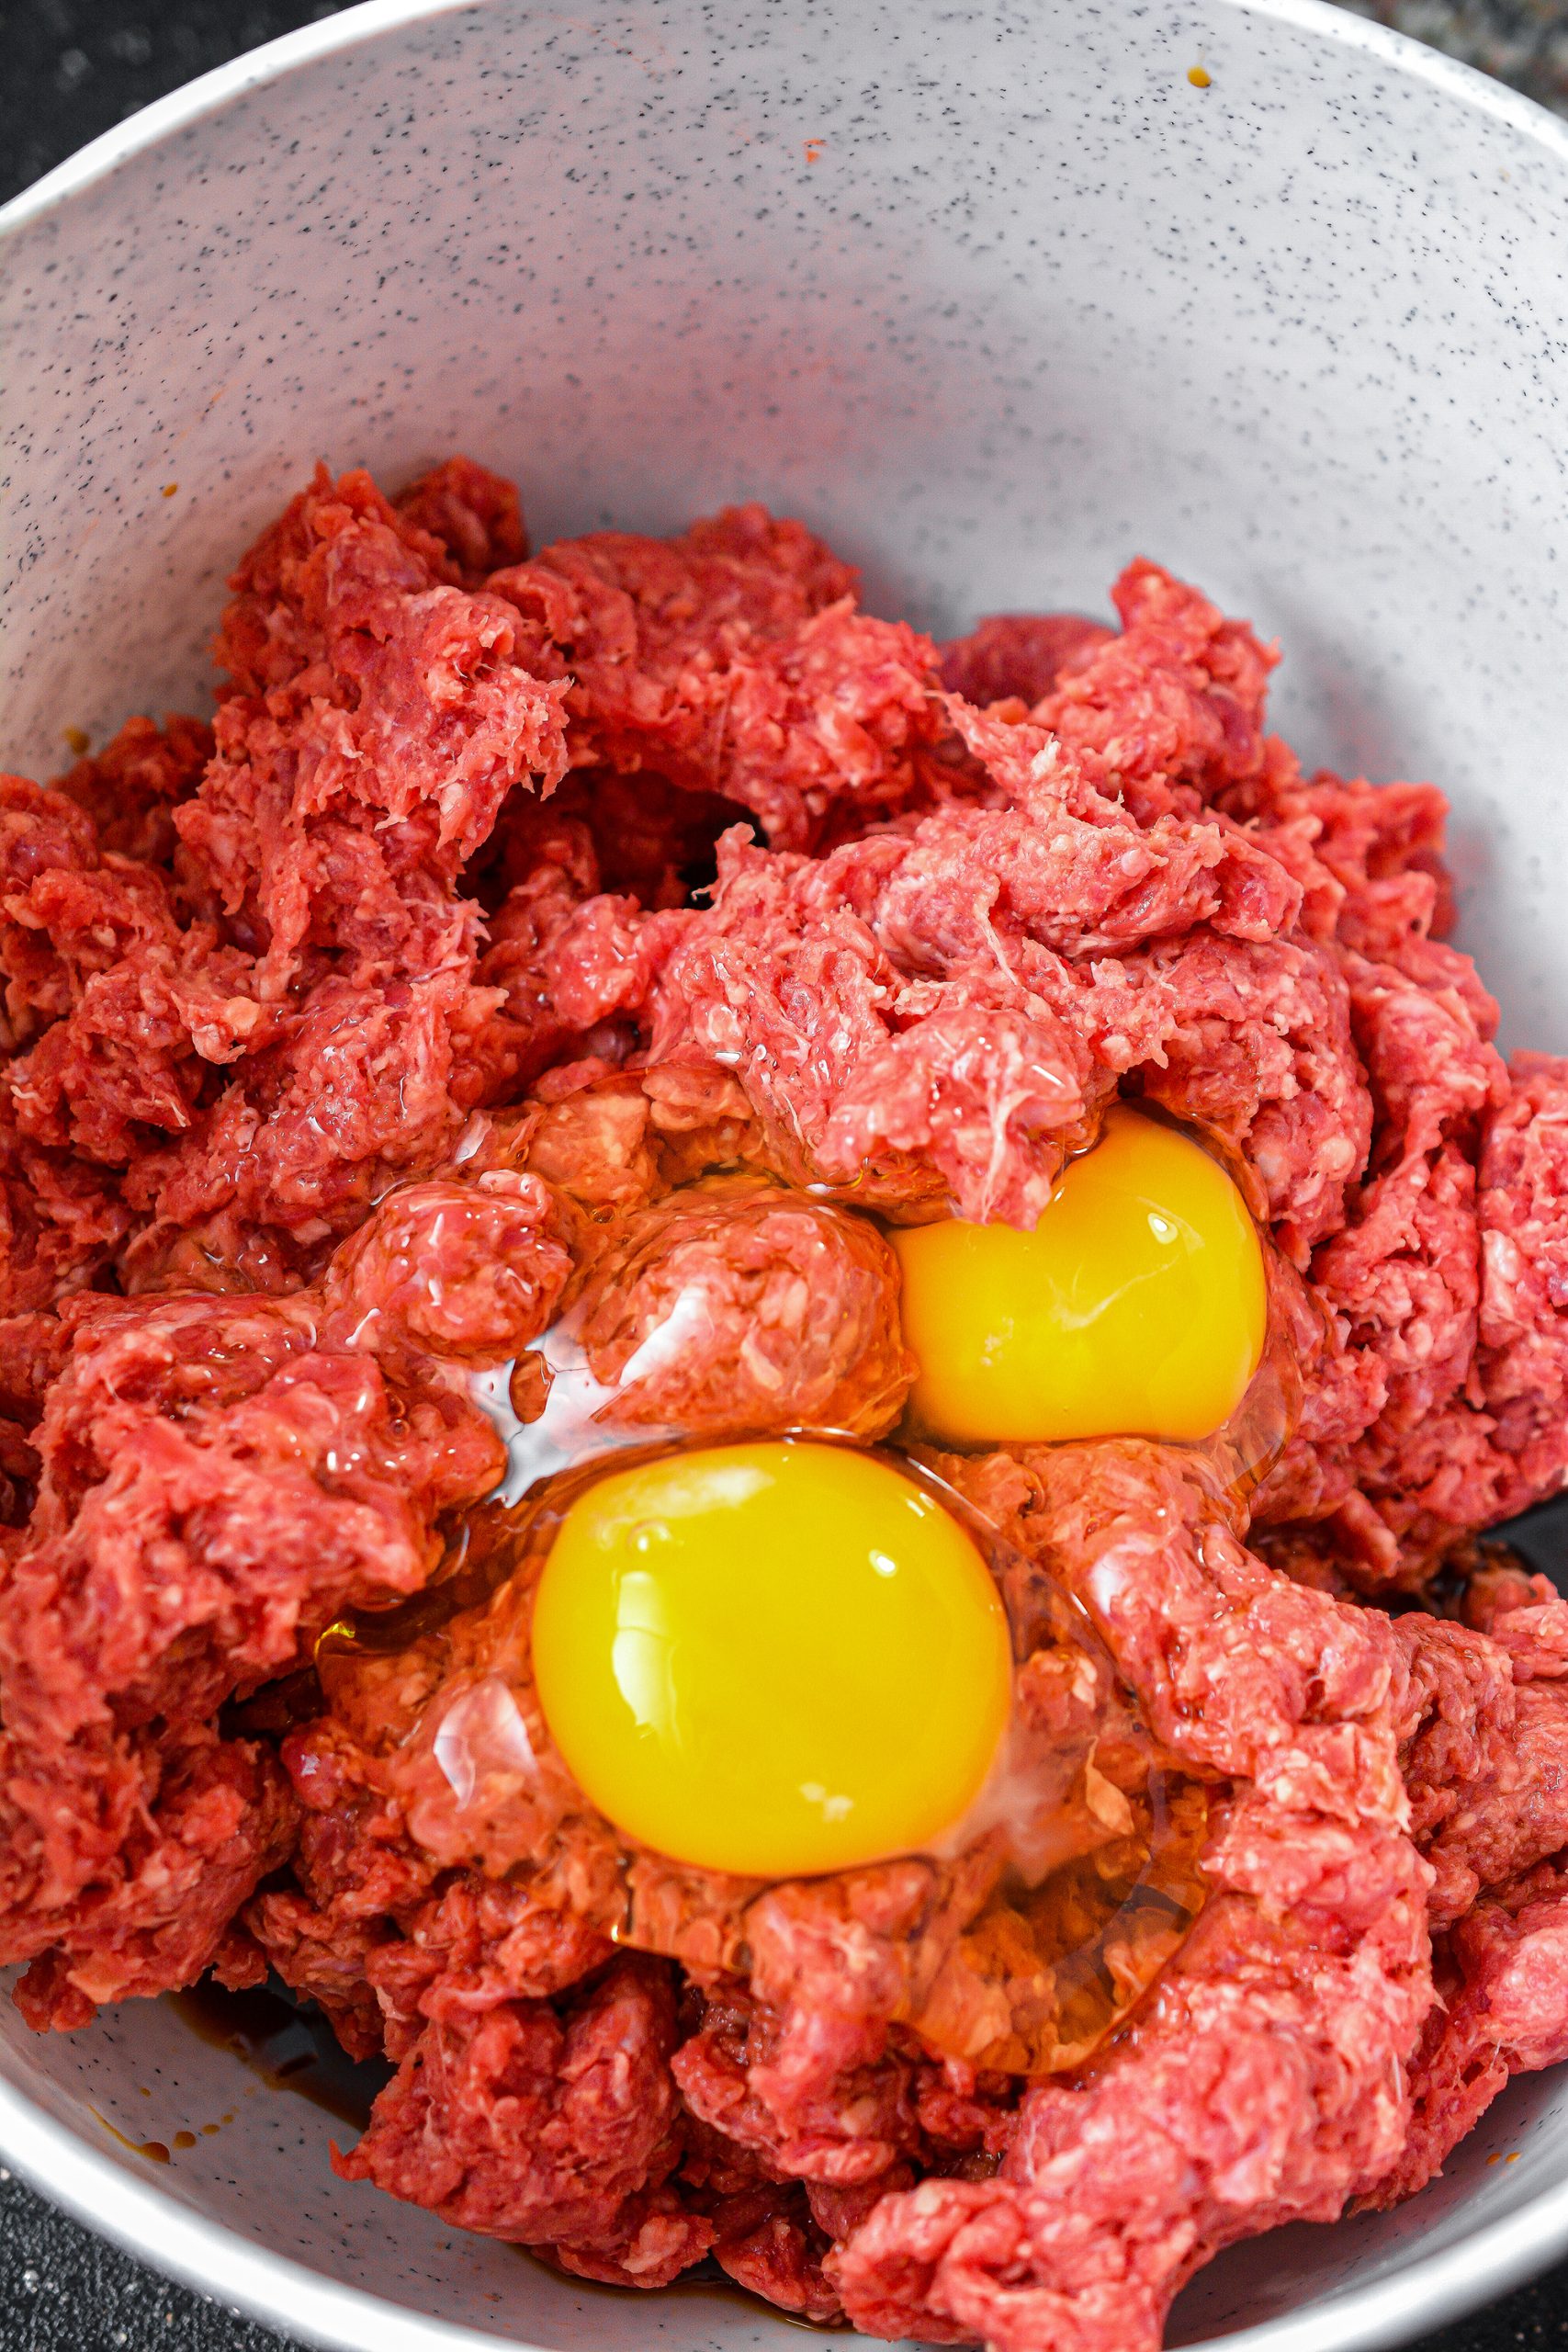 In a bowl, knead together the ground beef, eggs, onions and peppers, breadcrumbs, minced garlic, onion powder, worcestershire sauce and salt and pepper to taste until well combined.